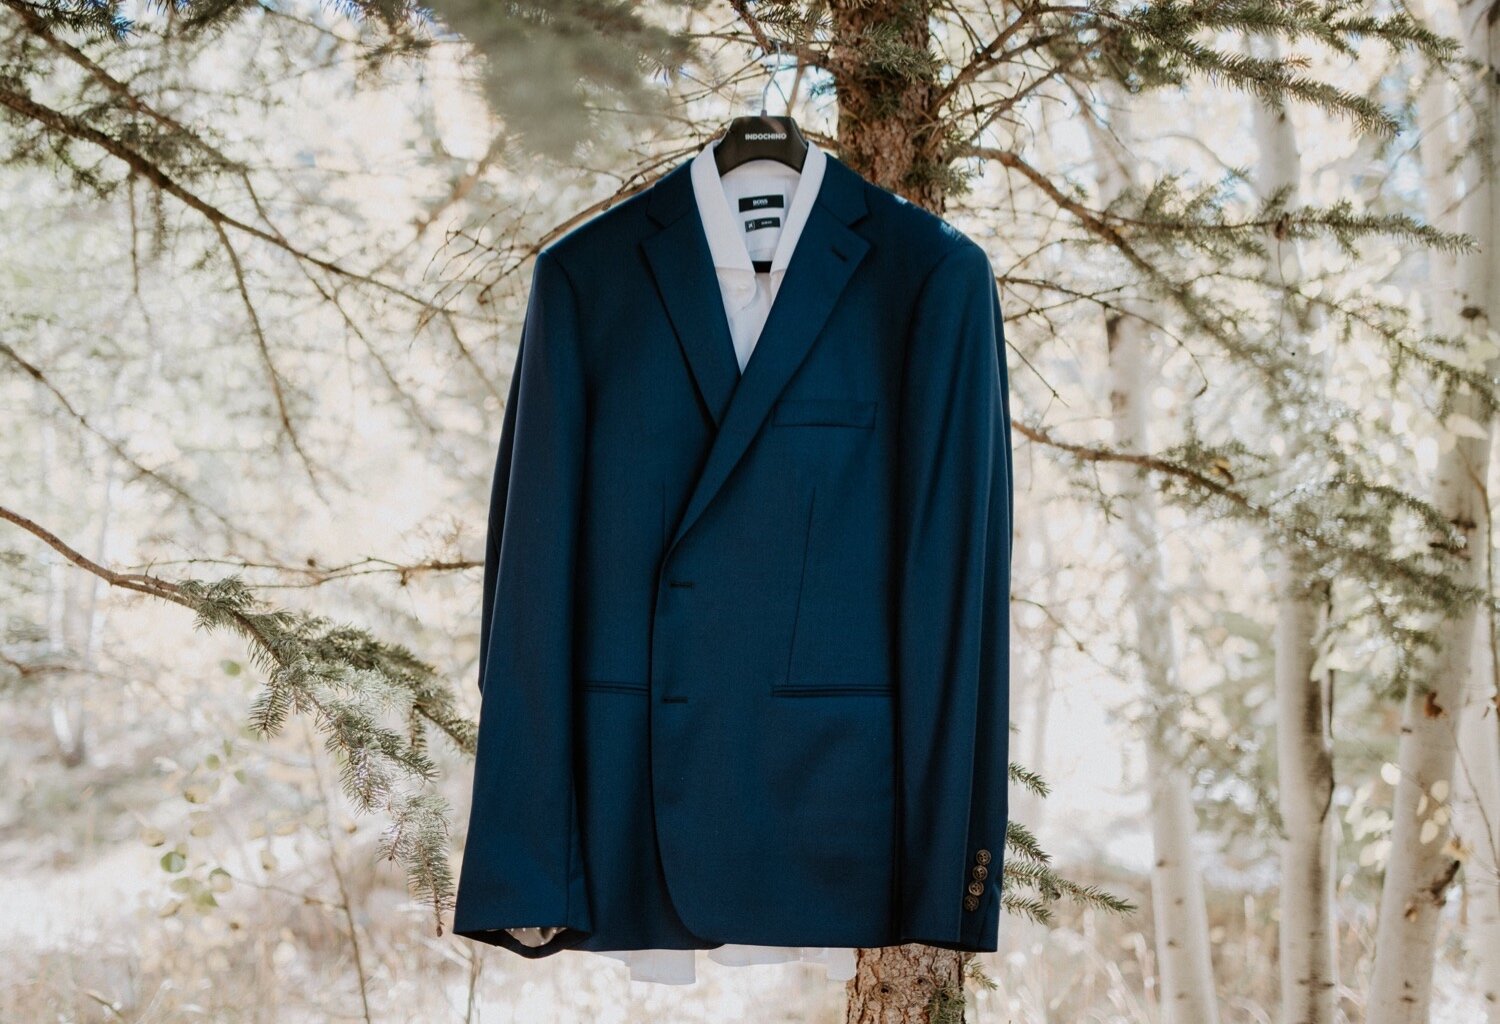  Groom suit, Indochino, Windy Point Campground Wedding Colorado, Dillon Colorado Wedding, Colorado mountain wedding, Dillon Colorado Wedding Photographer, Colorado Wedding Photographer, Colorado mountain wedding venues, Colorado campground wedding ve